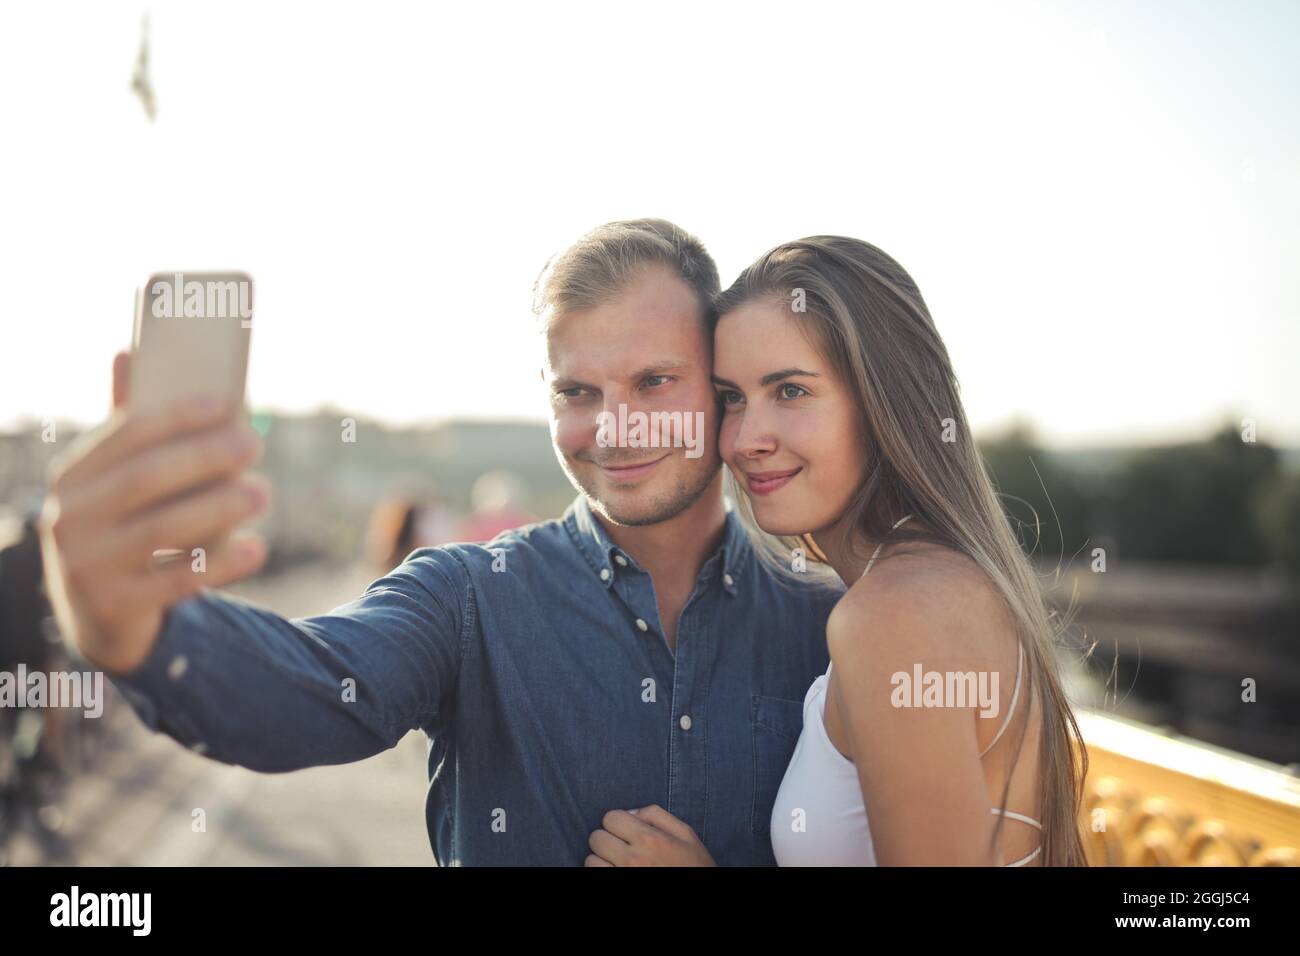 young woman takes a selfie on the street Stock Photo